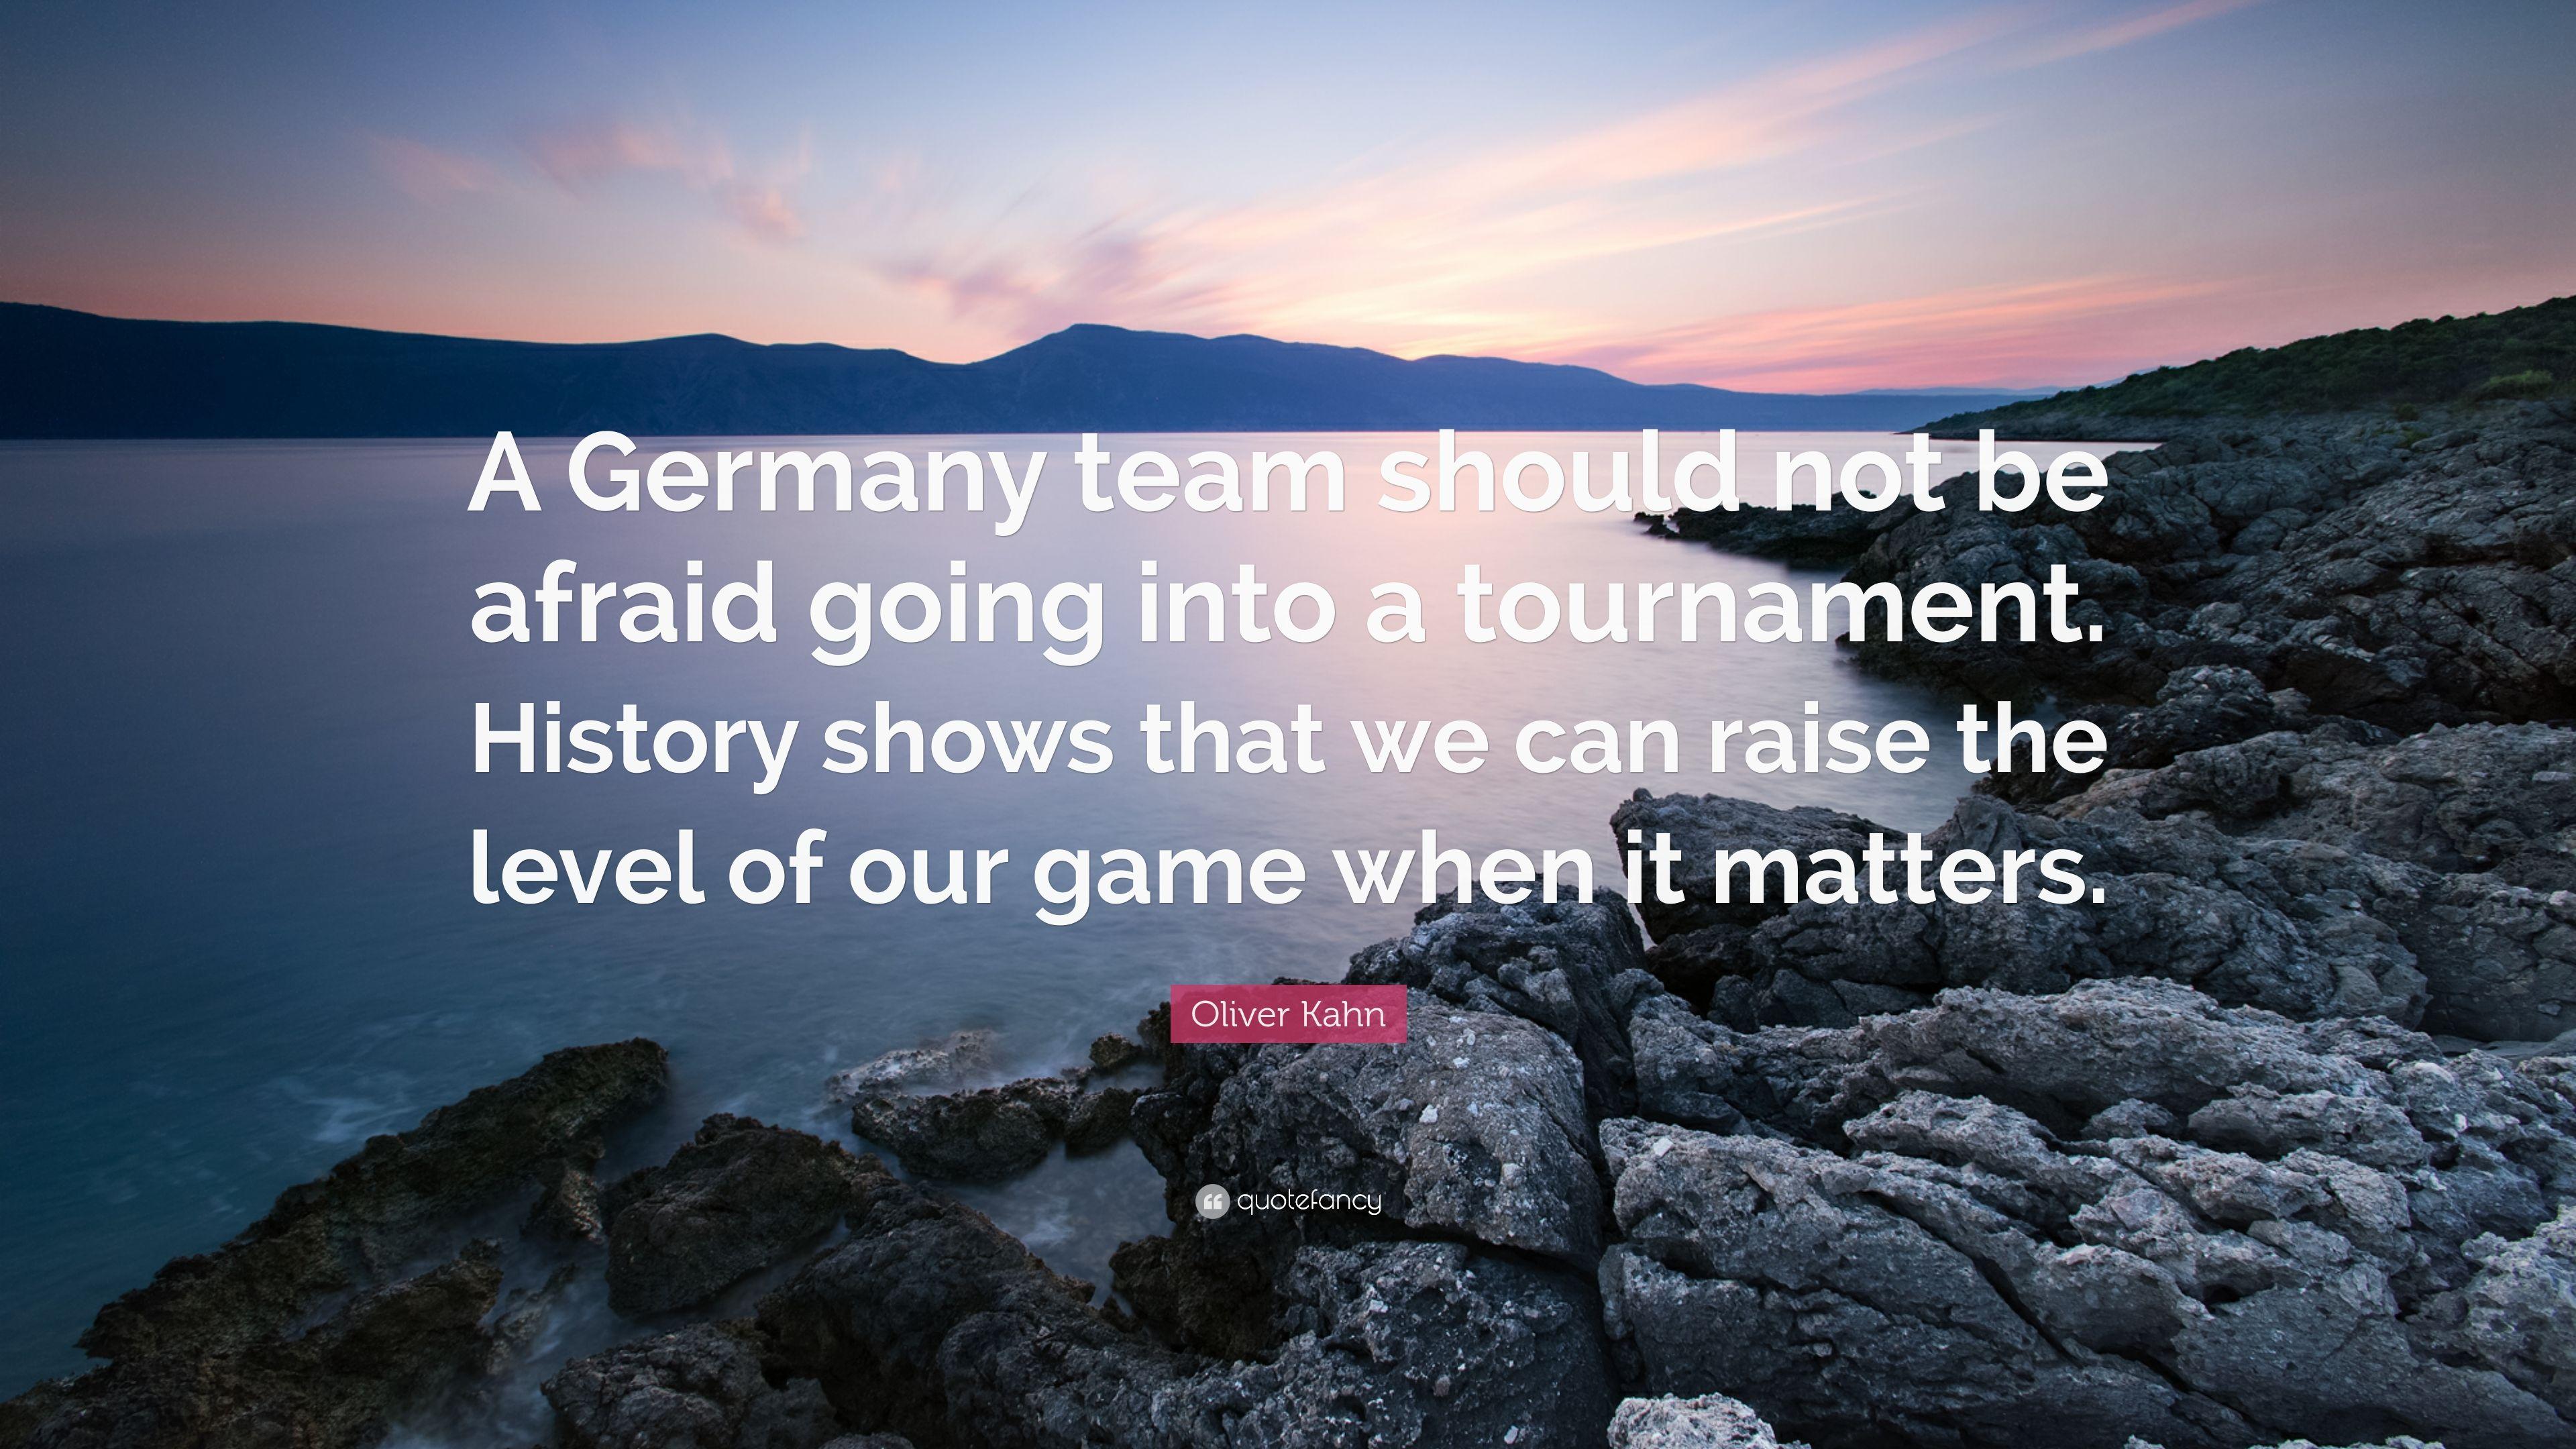 Oliver Kahn Quote: “A Germany team should not be afraid going into a